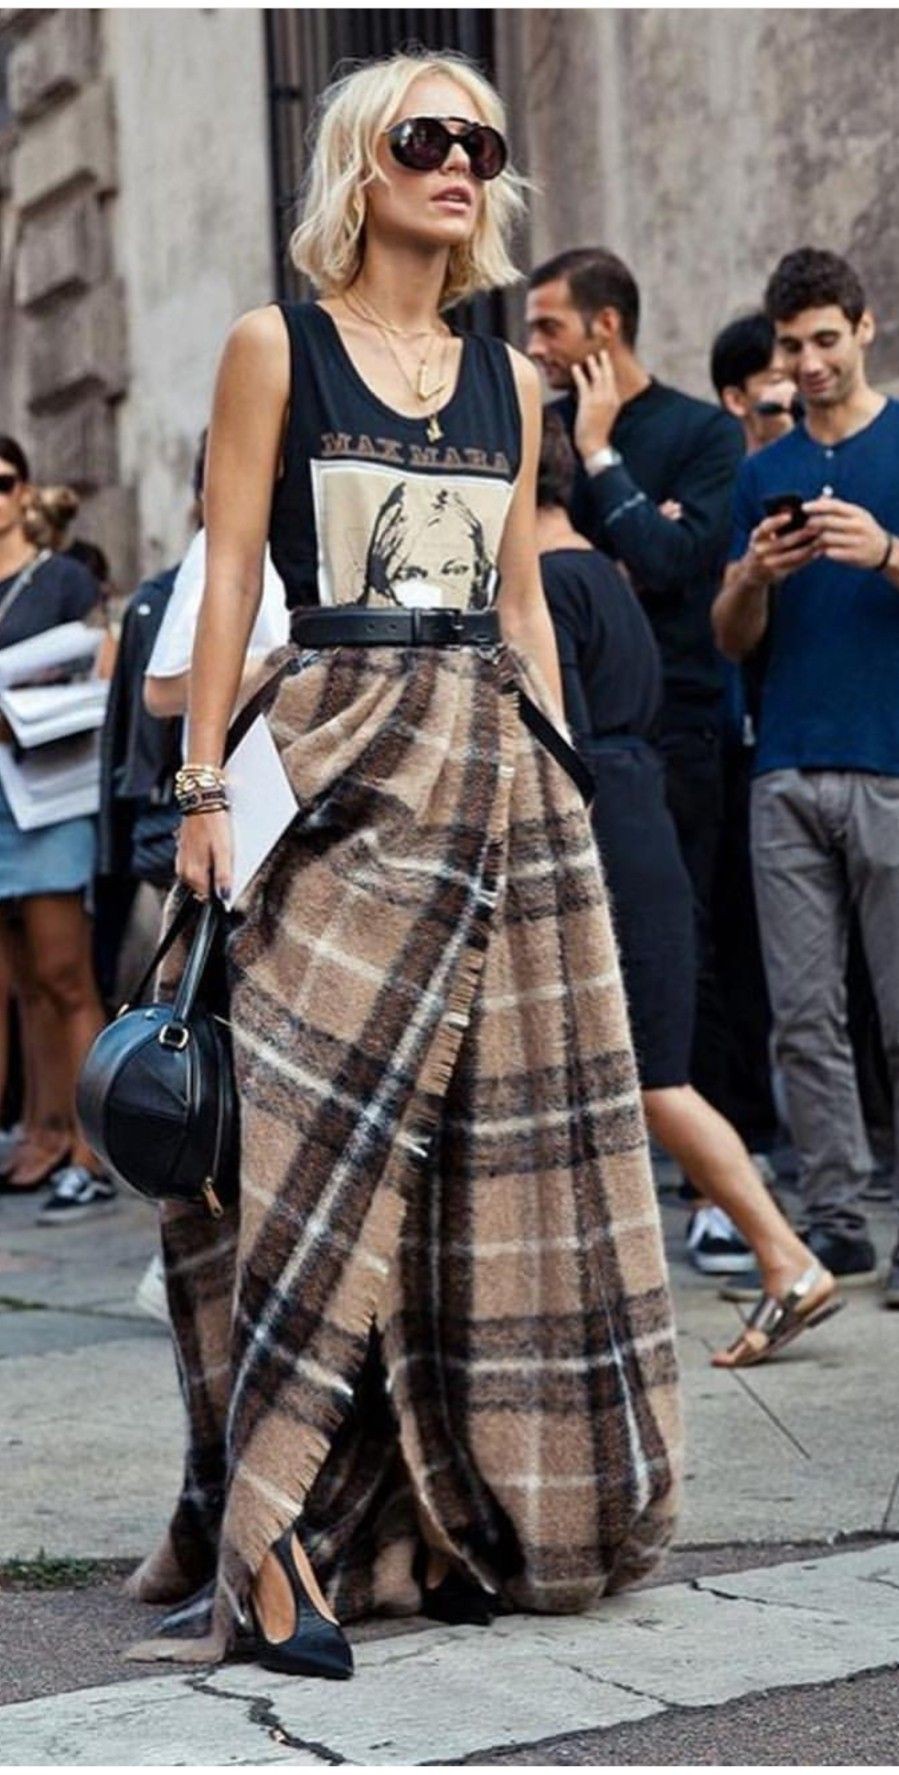 This is a new way to wear a blanket skirt! Love it | ღ Awesome fashion clothes... | Summer Outfit Ideas 2020: FASHION,  skirts,  Outfit Ideas,  summer outfits,  Love  